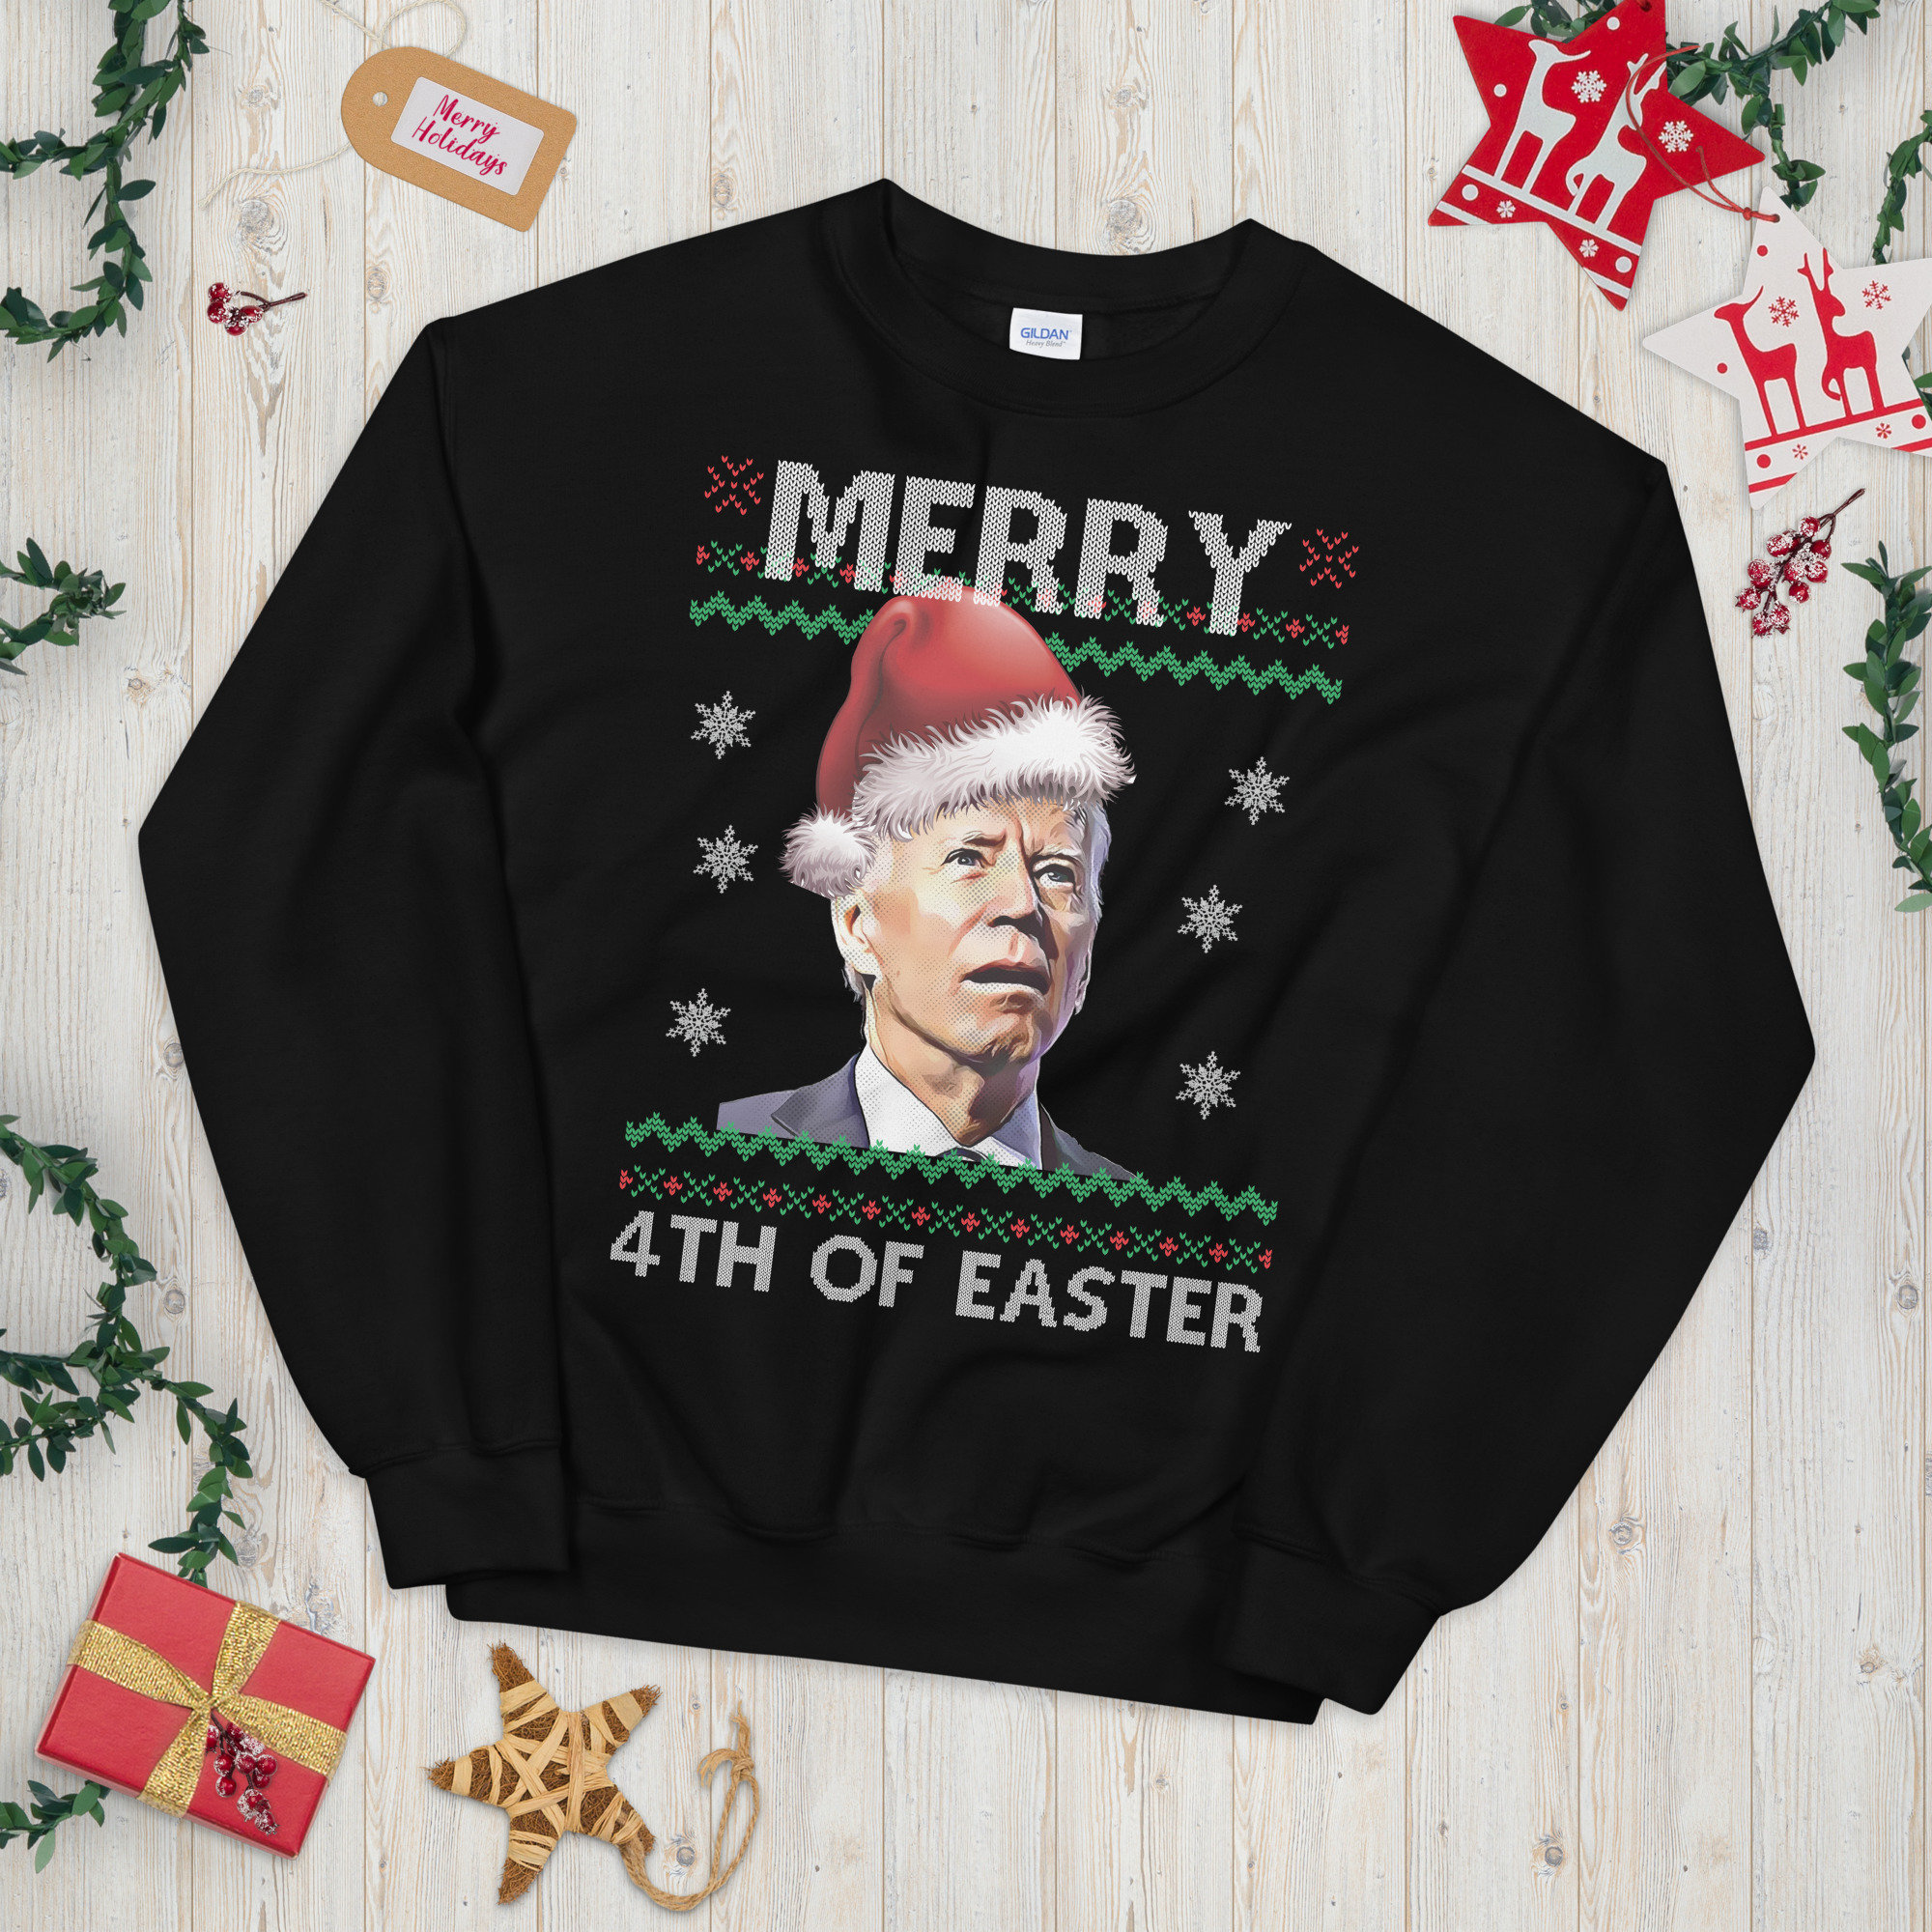 100% Authentic Merry 4th Of Easter Funny Biden Christmas Ugly Sweater T ...